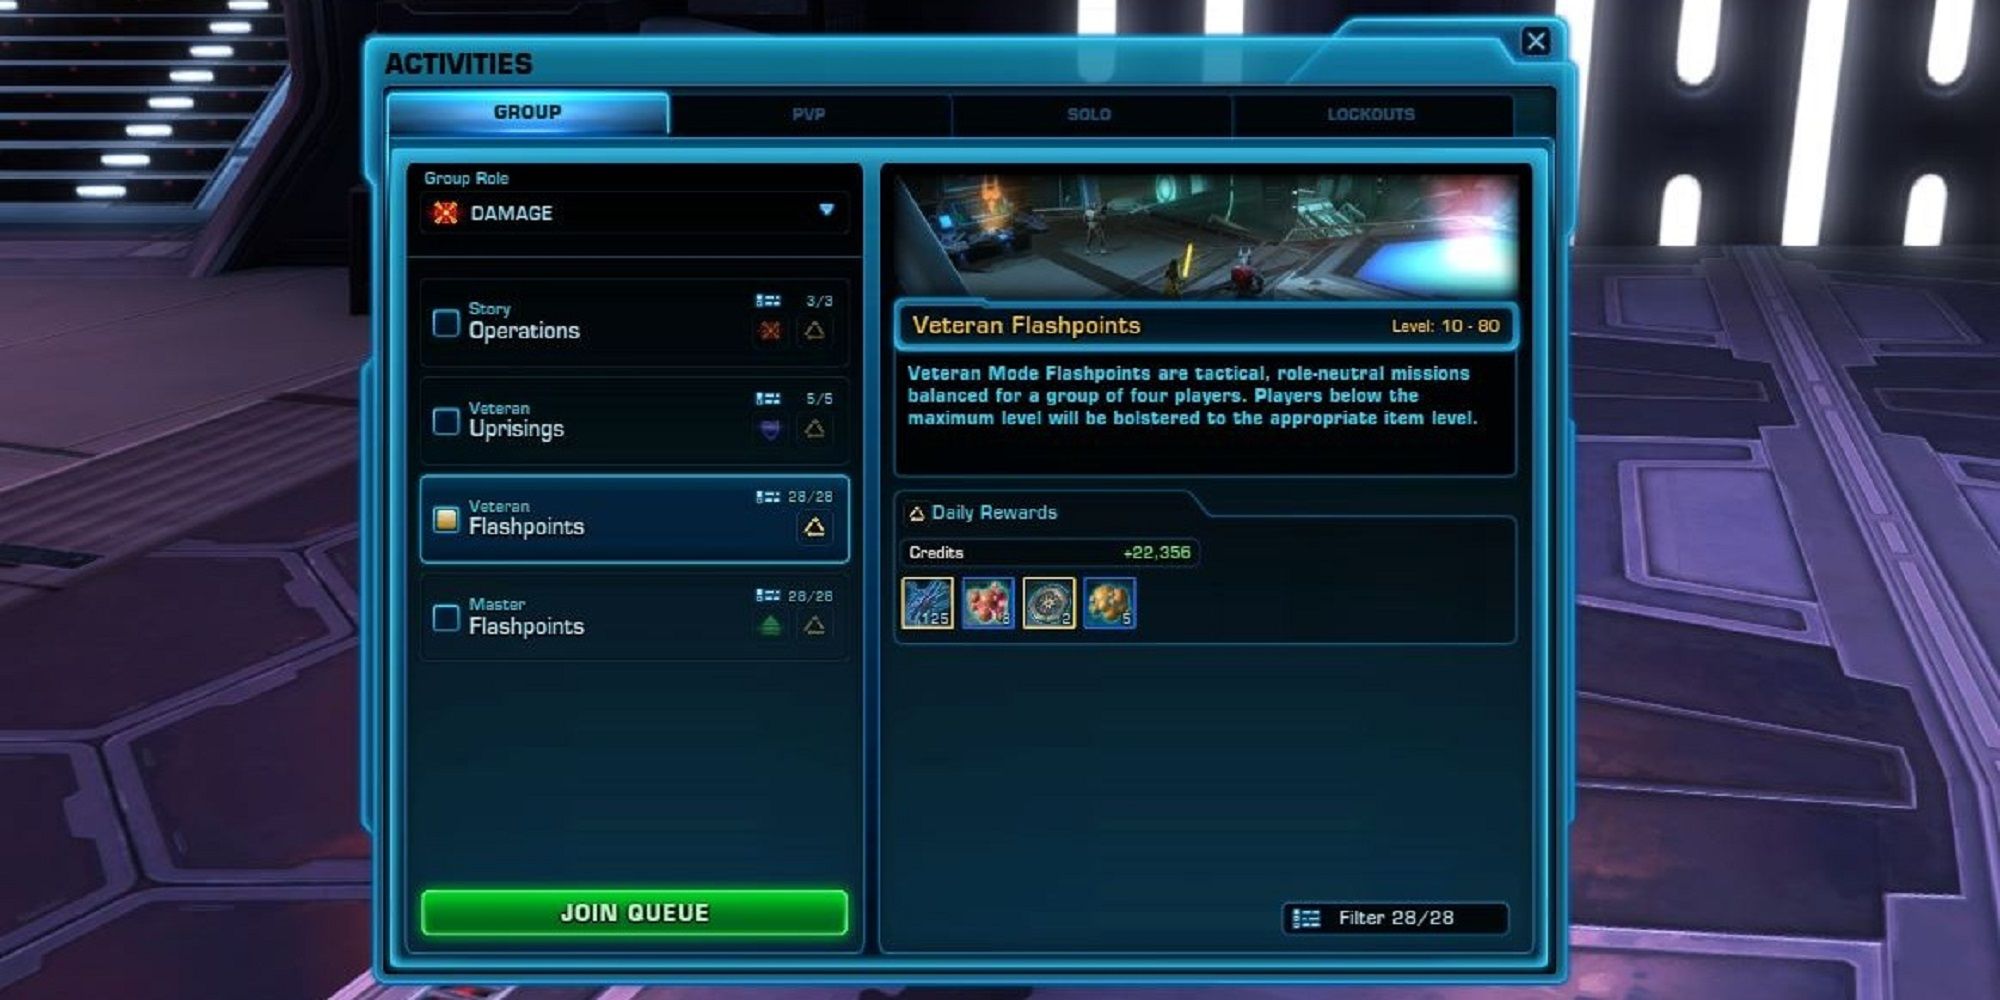 Group finder window in SWTOR